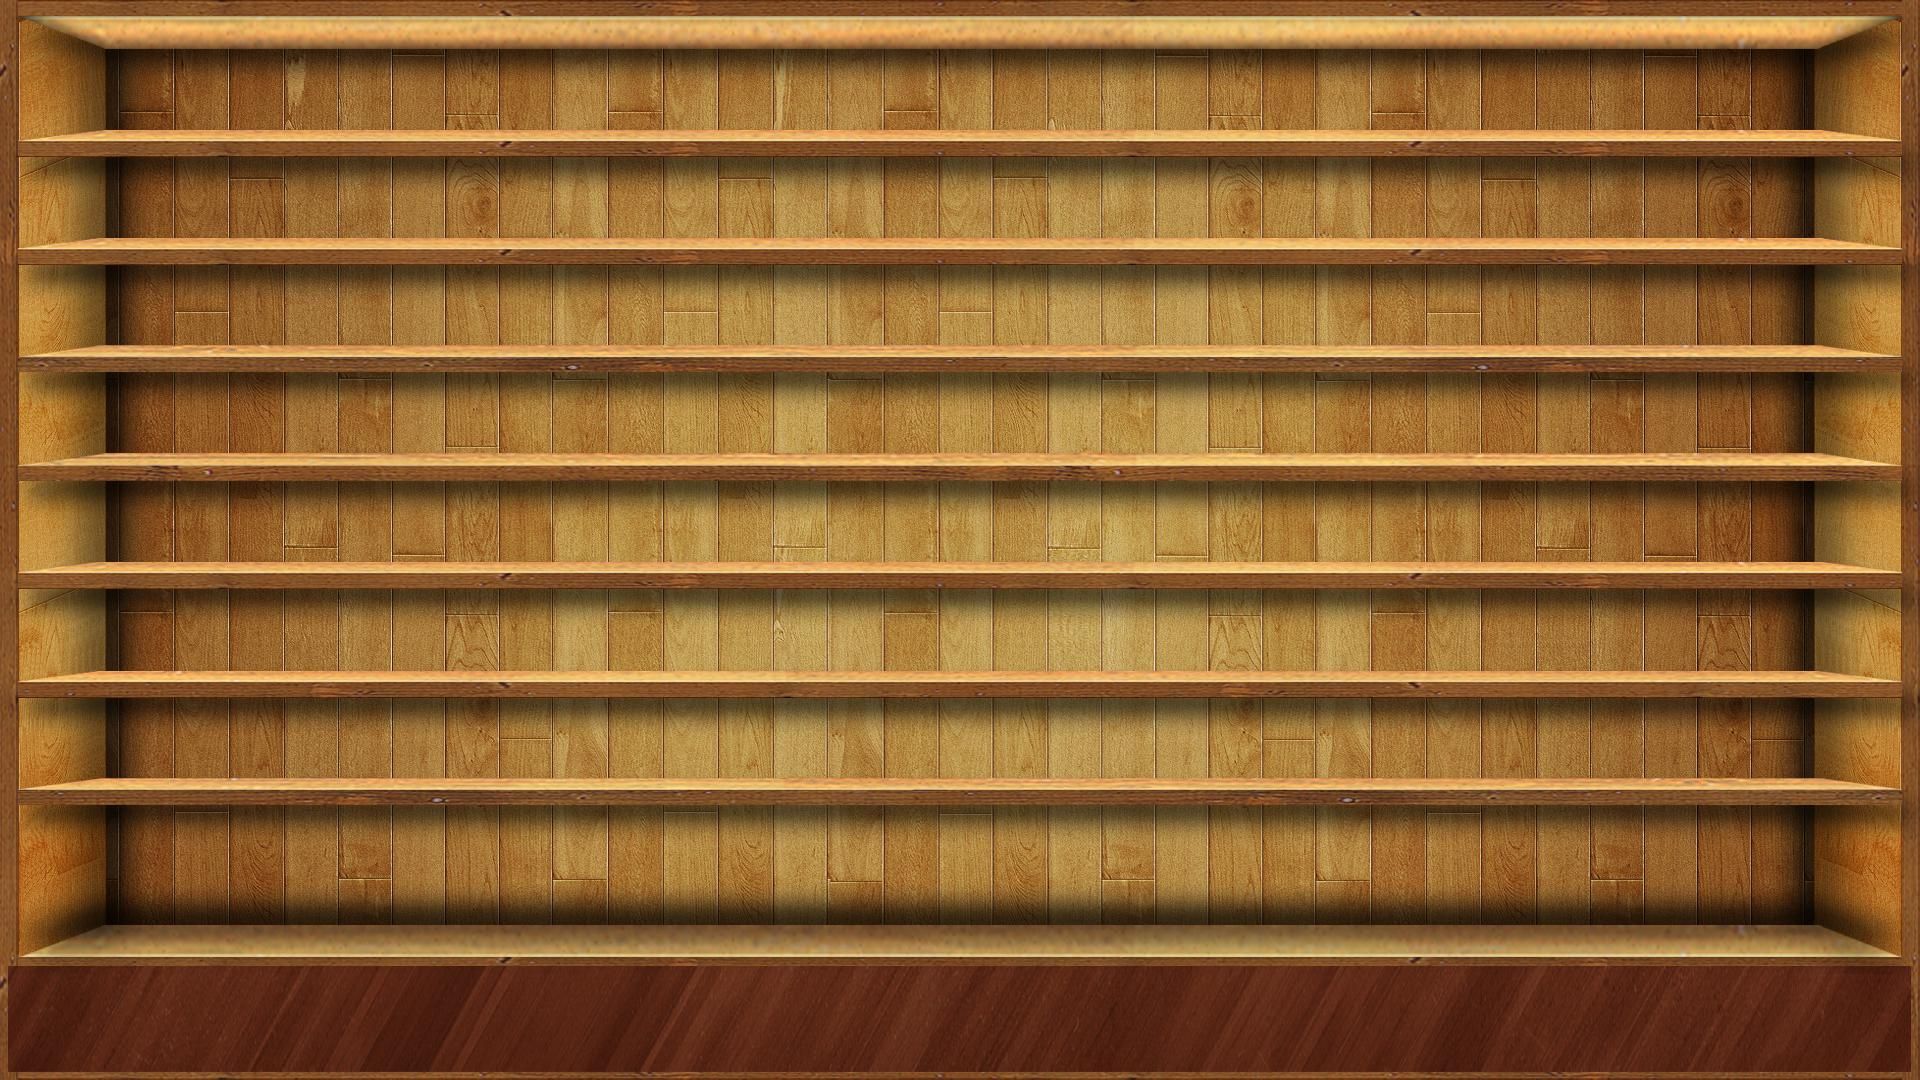 Bookshelf HD Wallpaper Picture Image And Other